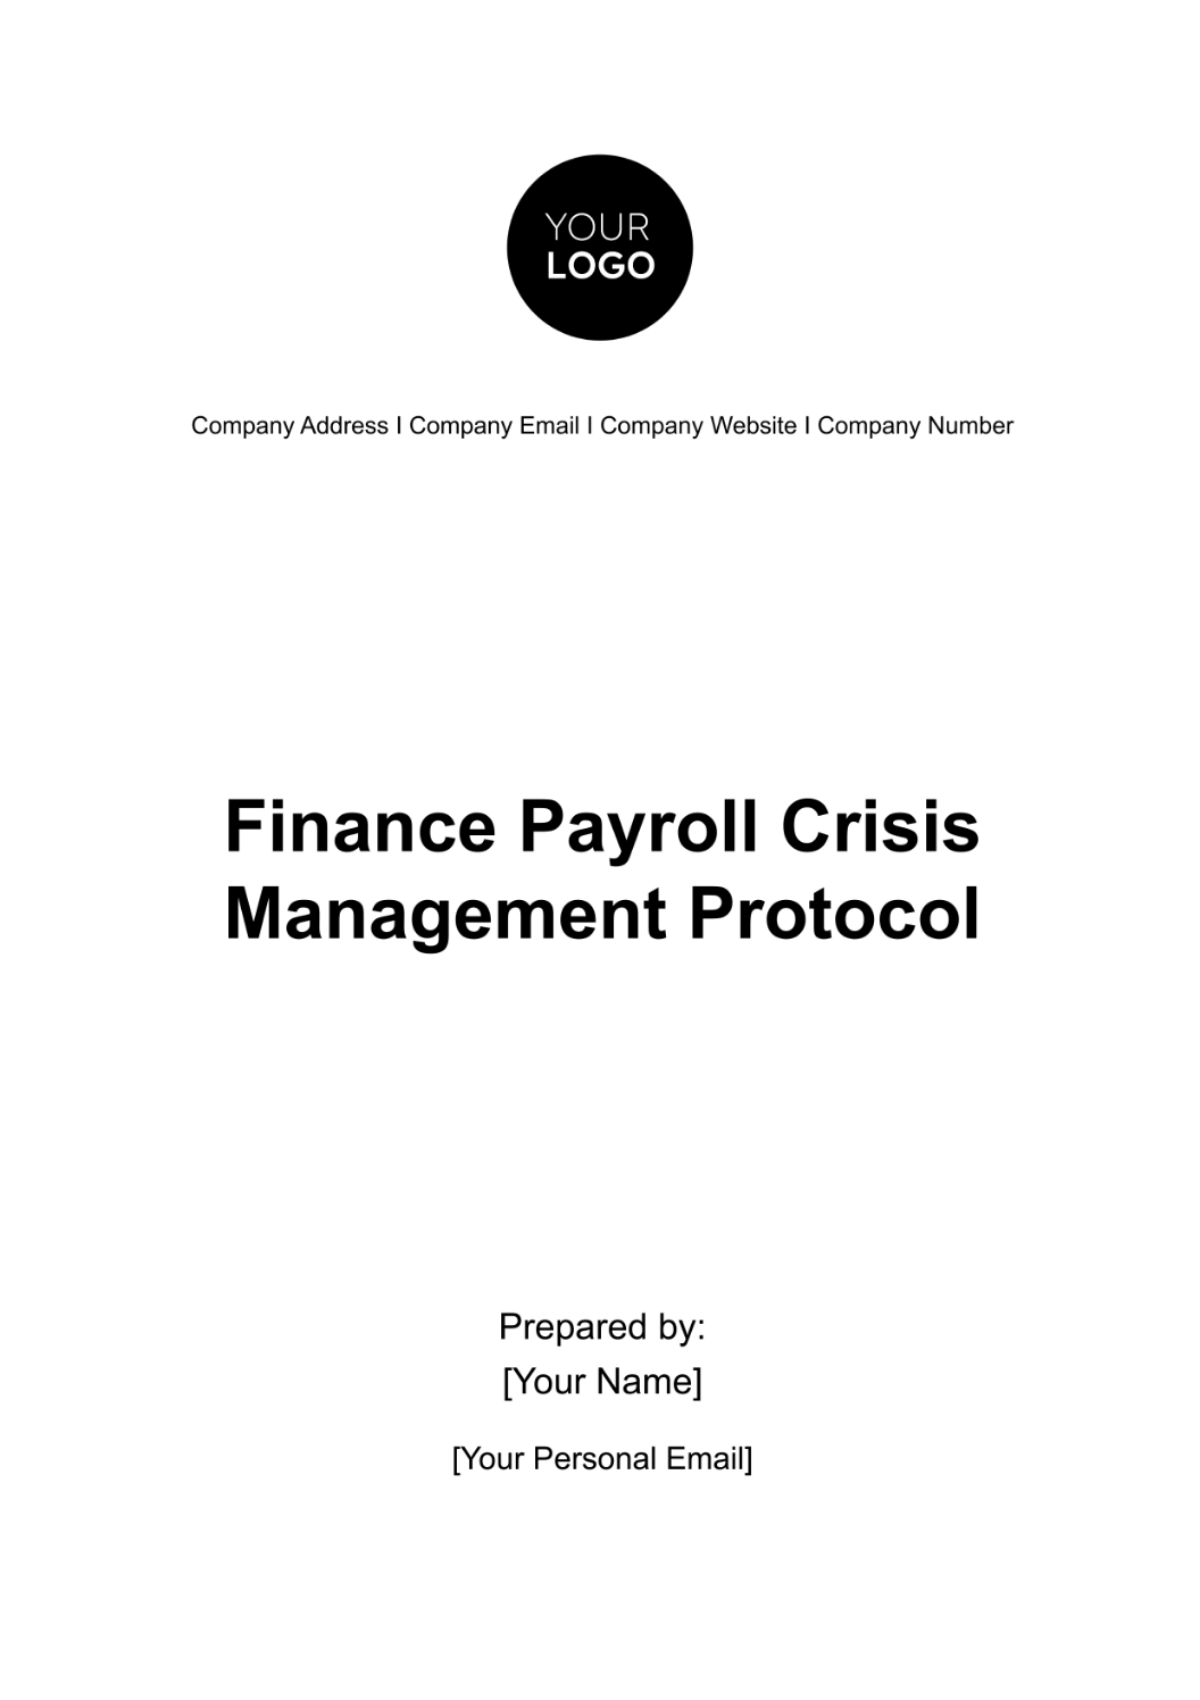 Finance Payroll Crisis Management Protocol Template